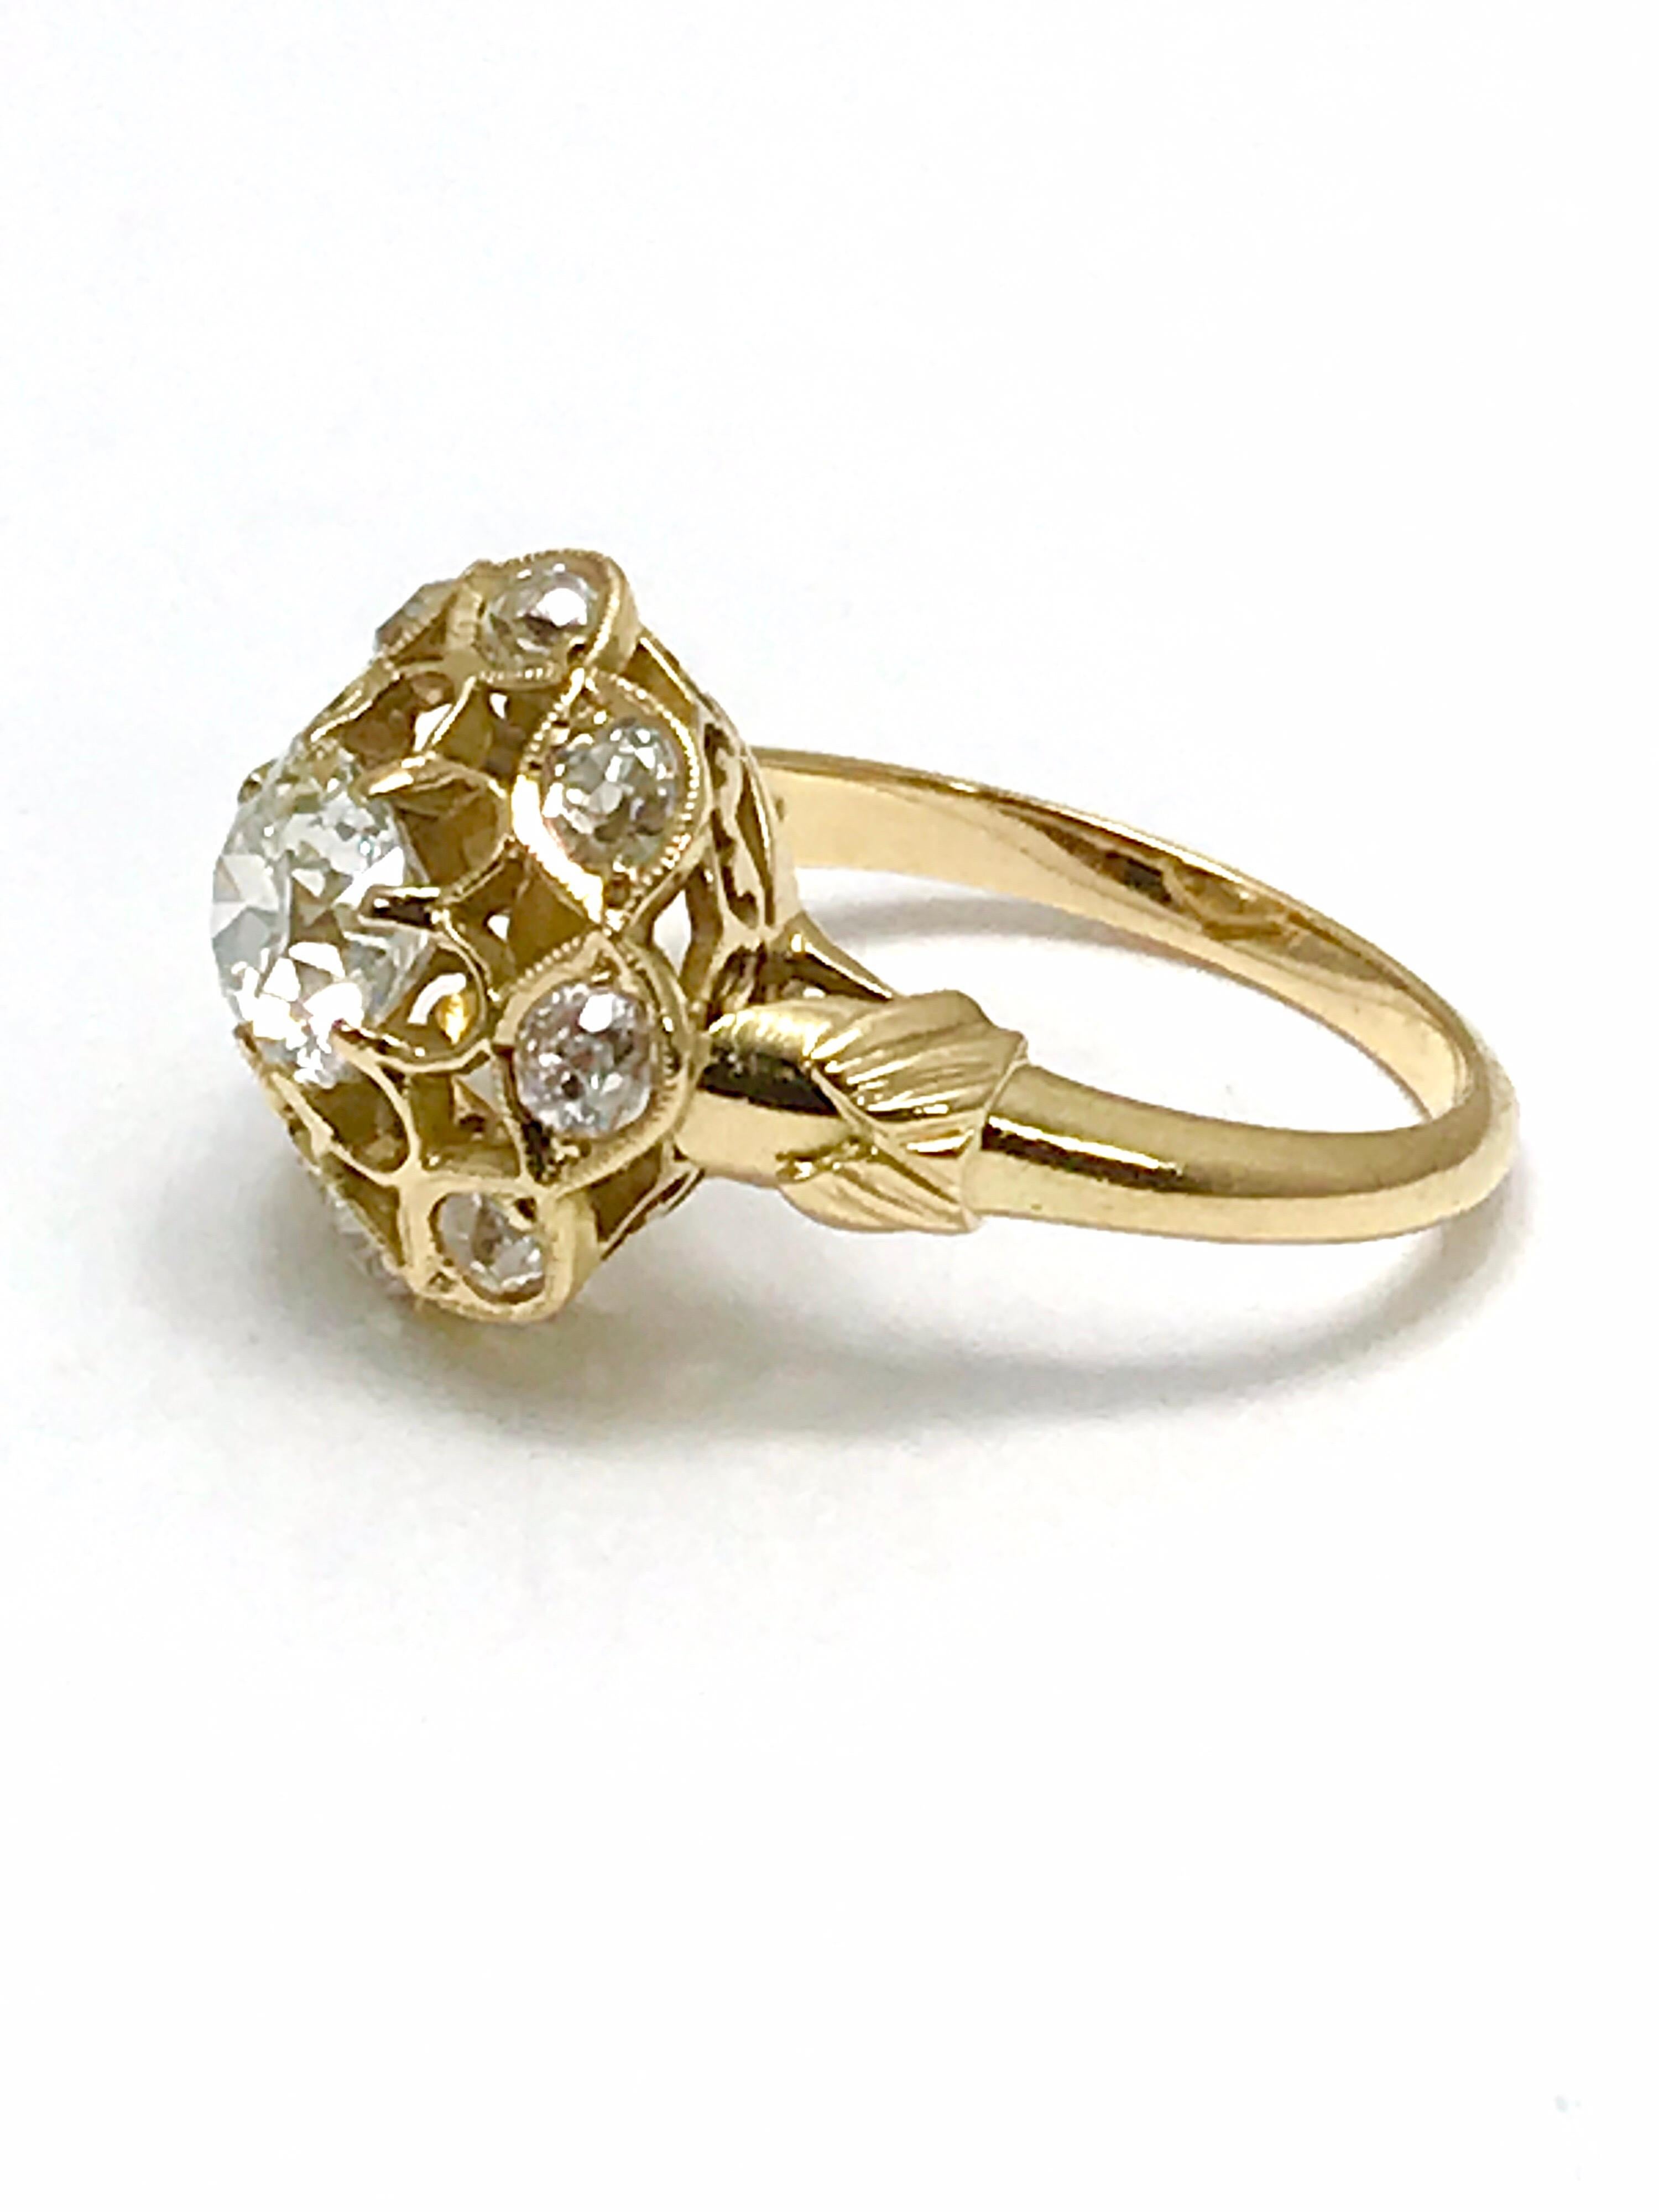 Victorian 1.29 Carat Old Mine Cut Diamond and 18 Karat Gold Engagement or Fashion Ring For Sale